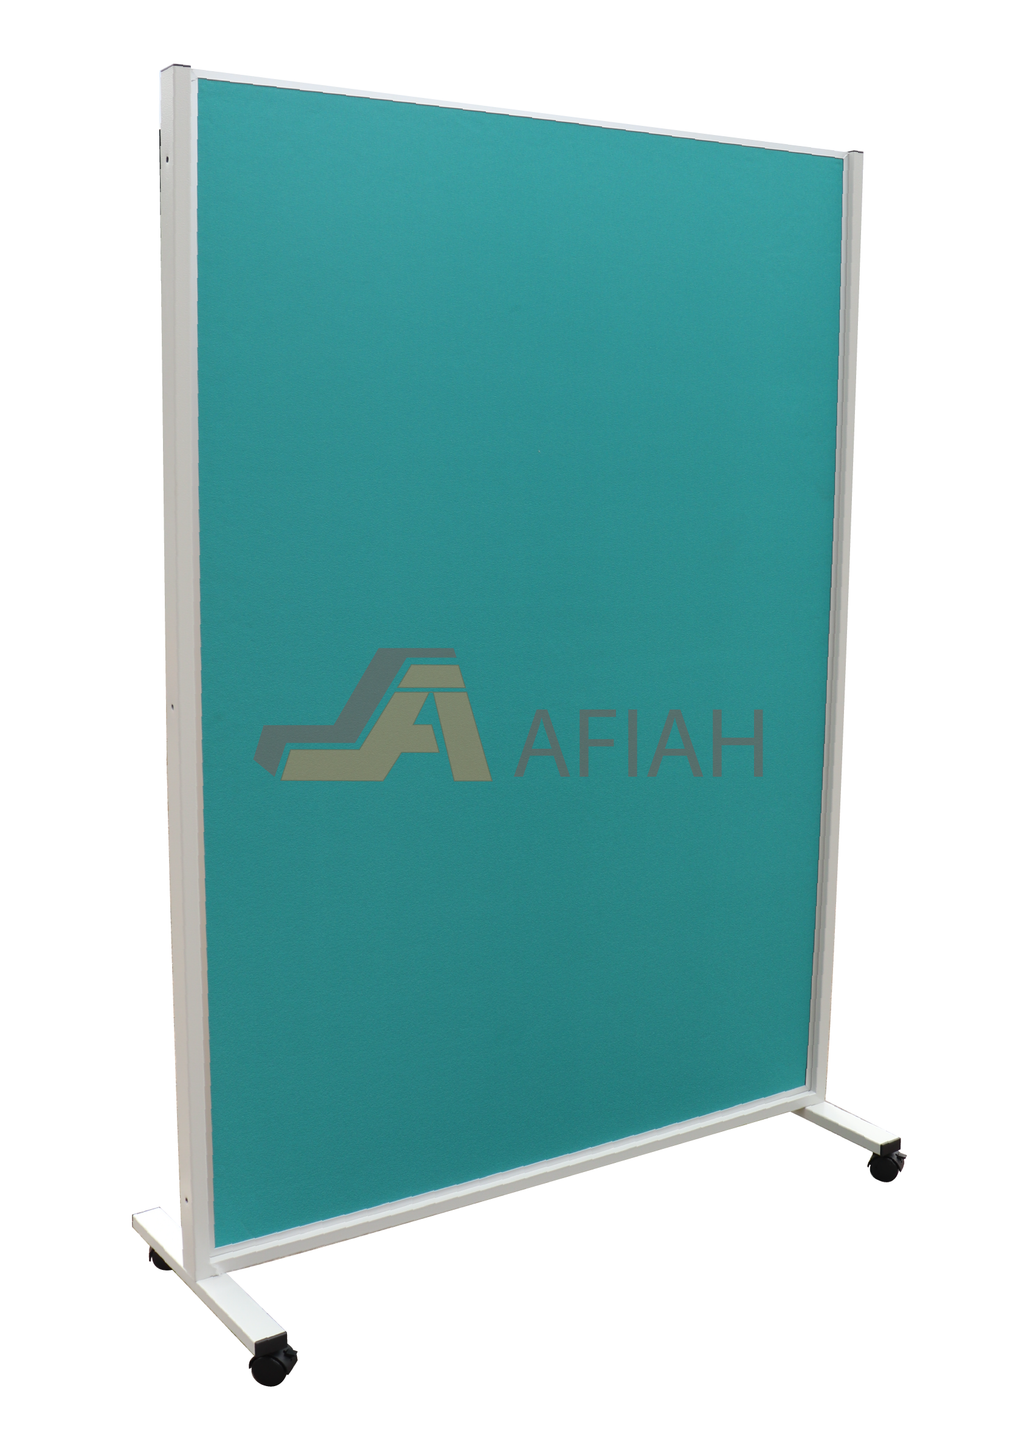 Free Standing Partition - Afia Manufacturing Sdn Bhd, Afiah Trading Company